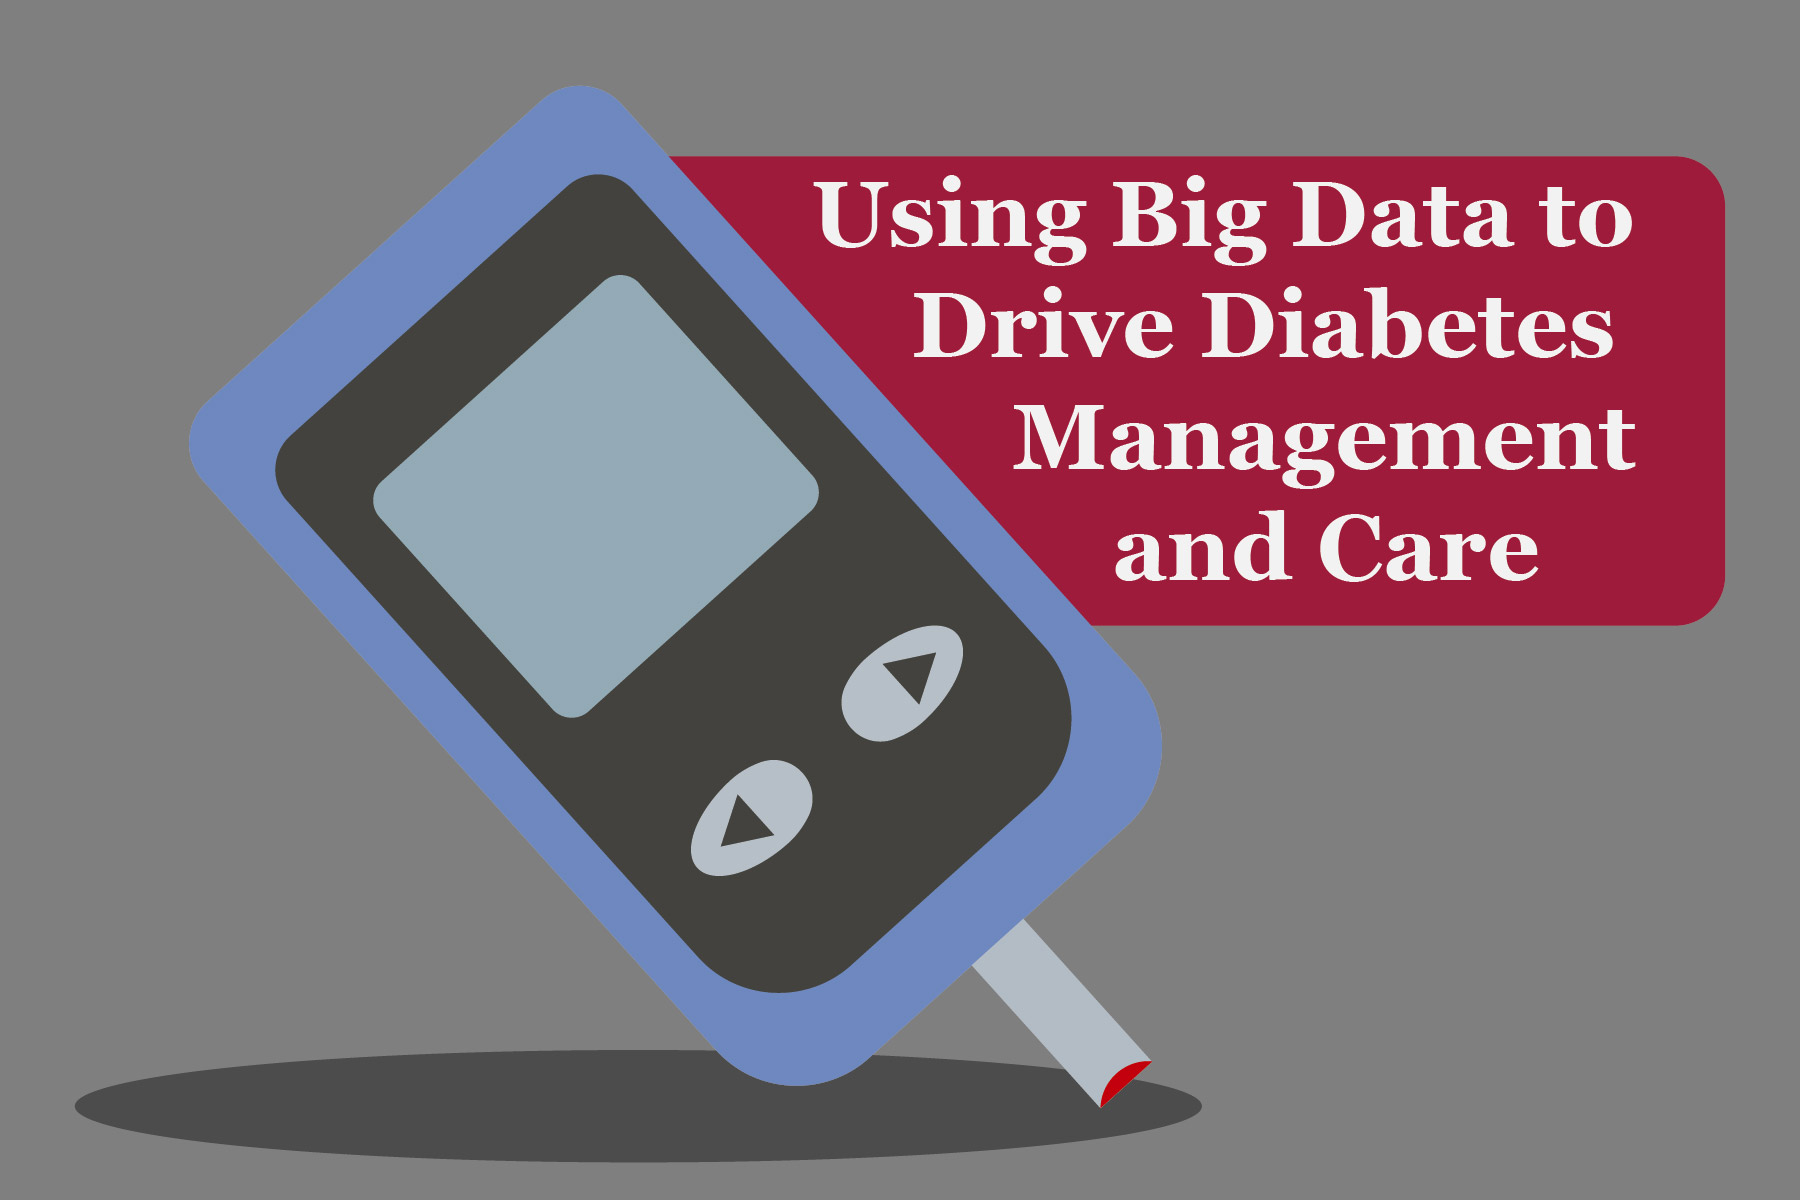 Using Big Data to Drive Diabetes Management and Care